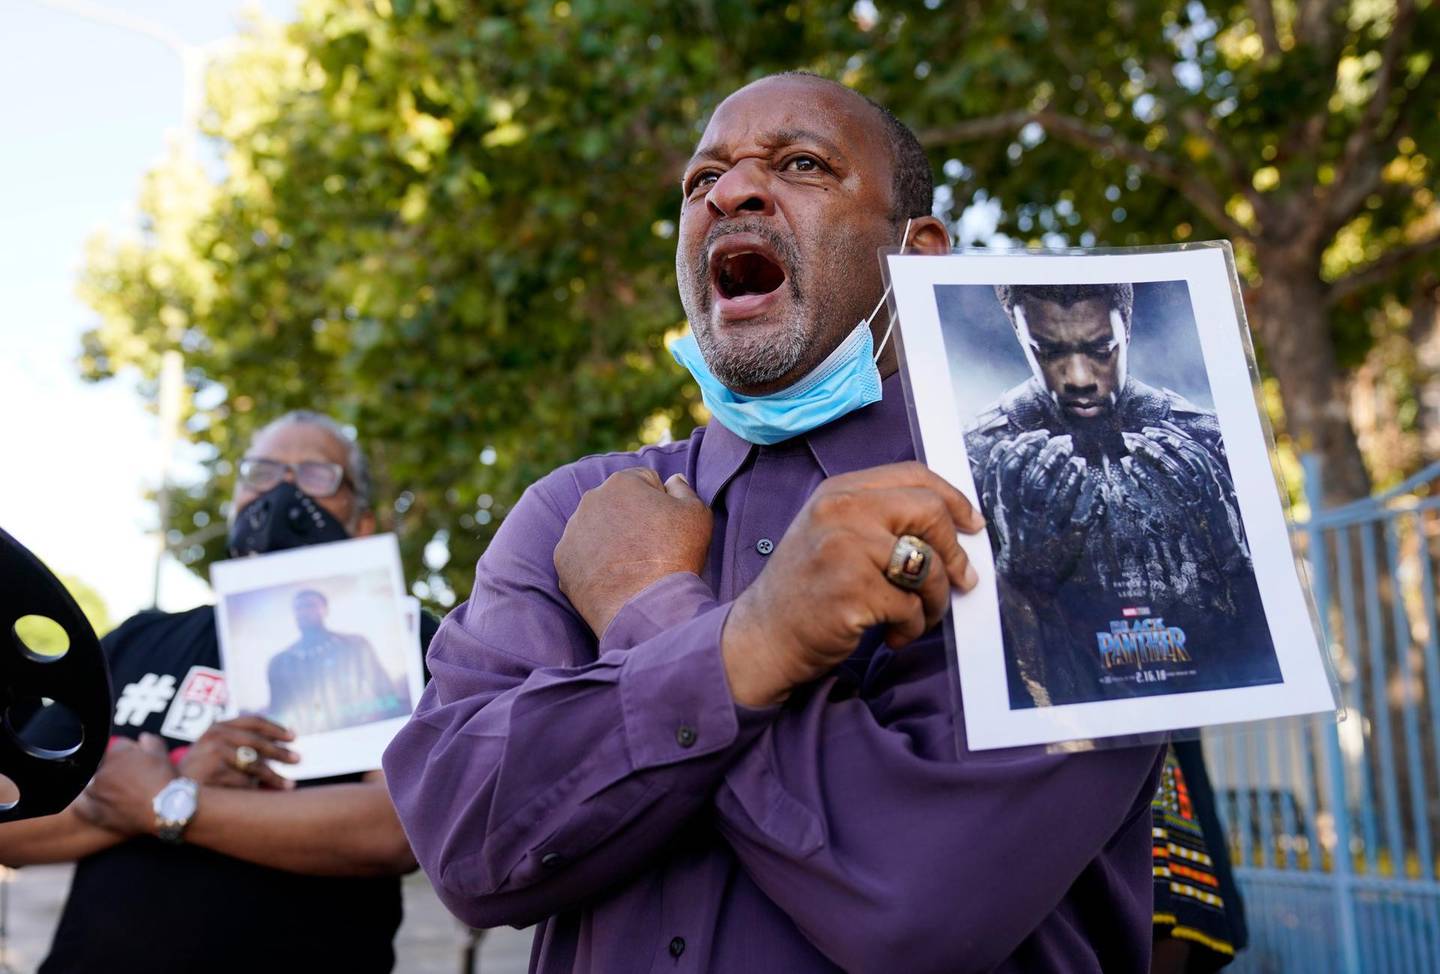 Najee Ali, director of Project Islamic Hope, leads a "Wakanda Forever!" salute from the 2018 film "Black Panther," during a news conference to celebrate the late actor and "Black Panther" star Chadwick Boseman, Saturday, Aug. 29. 2020, in Los Angeles. Boseman died Friday at 43 after a four-year fight with colon cancer. (AP Photo/Chris Pizzello)